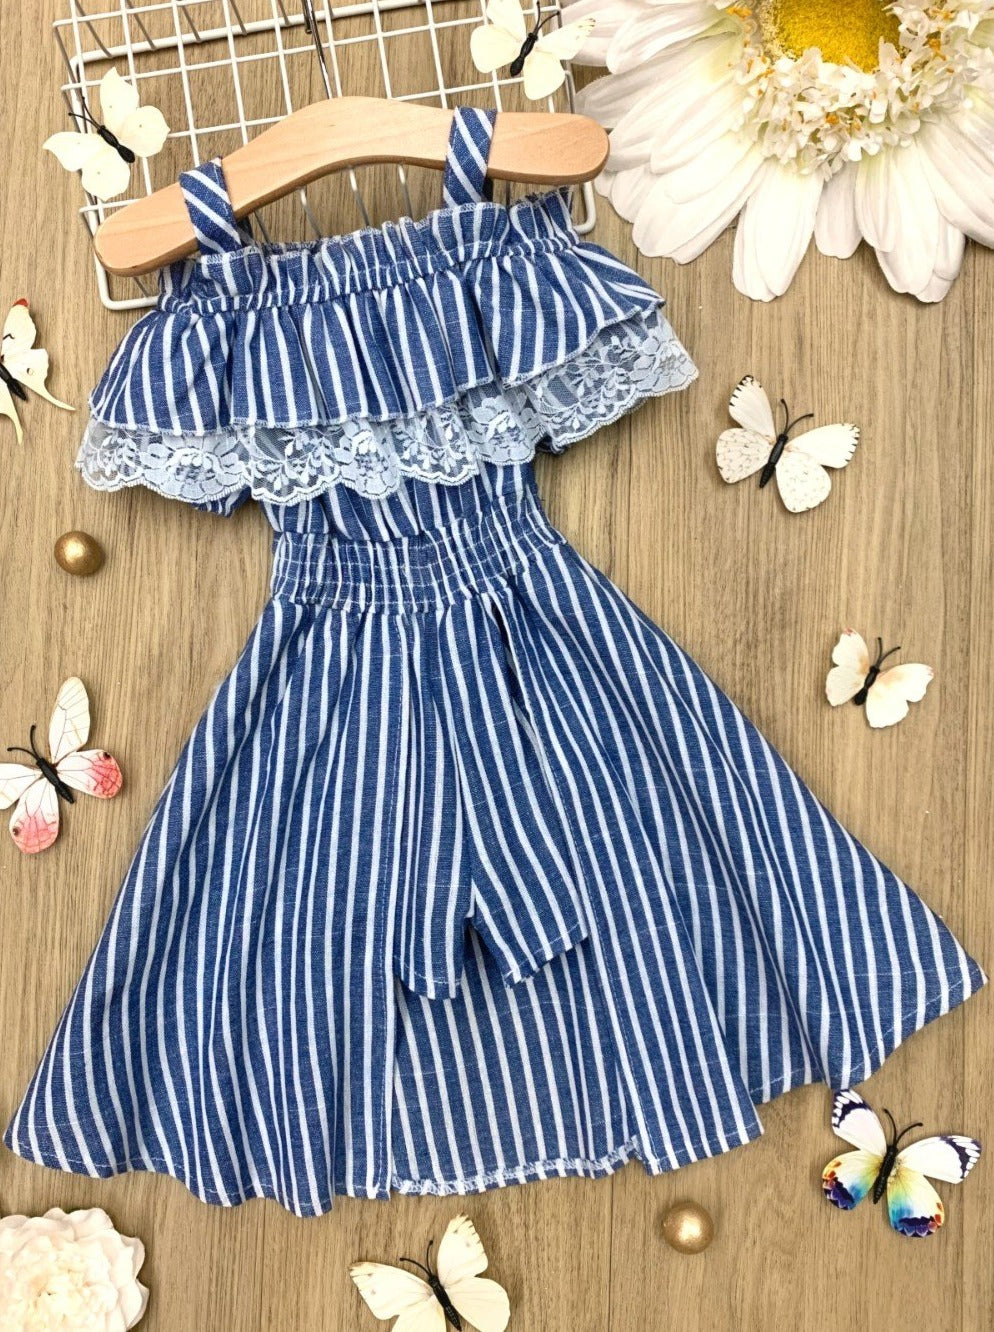 Girls Spring Outfits | Blue Pinstriped Cold Shoulder Lace Romper Dress ...